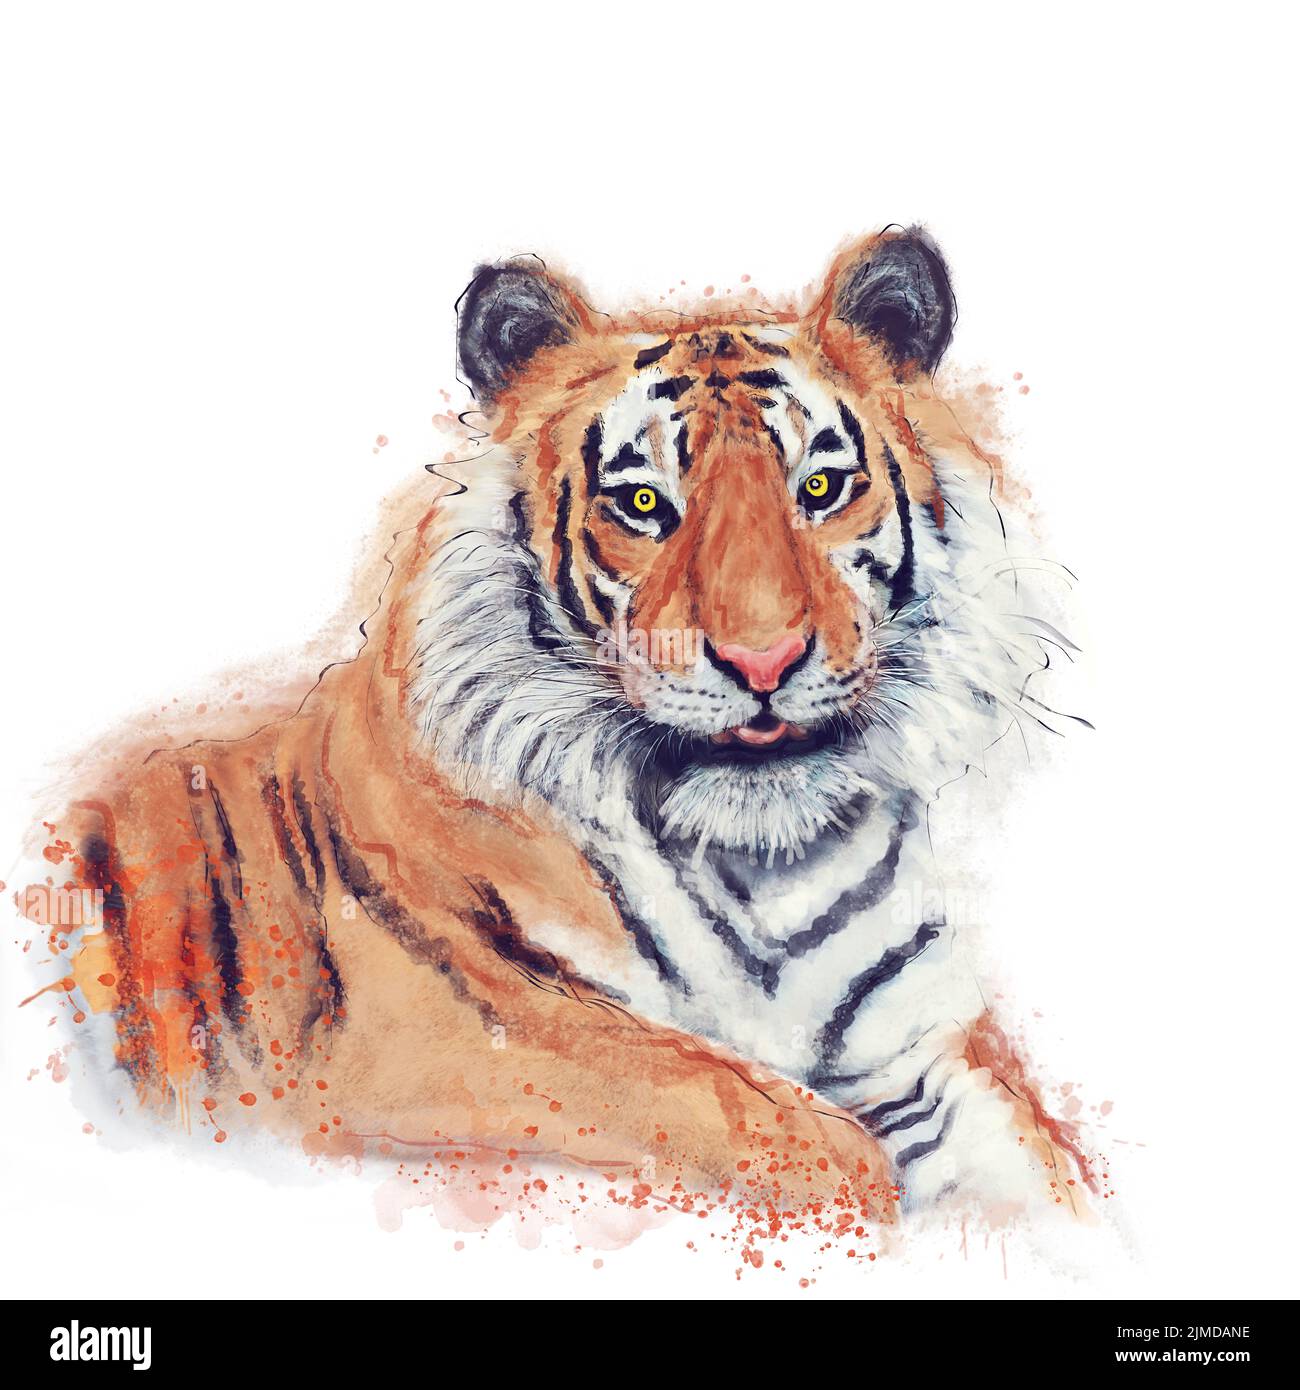 Digital Watercolor Painting Of Tiger on White Background Stock Photo